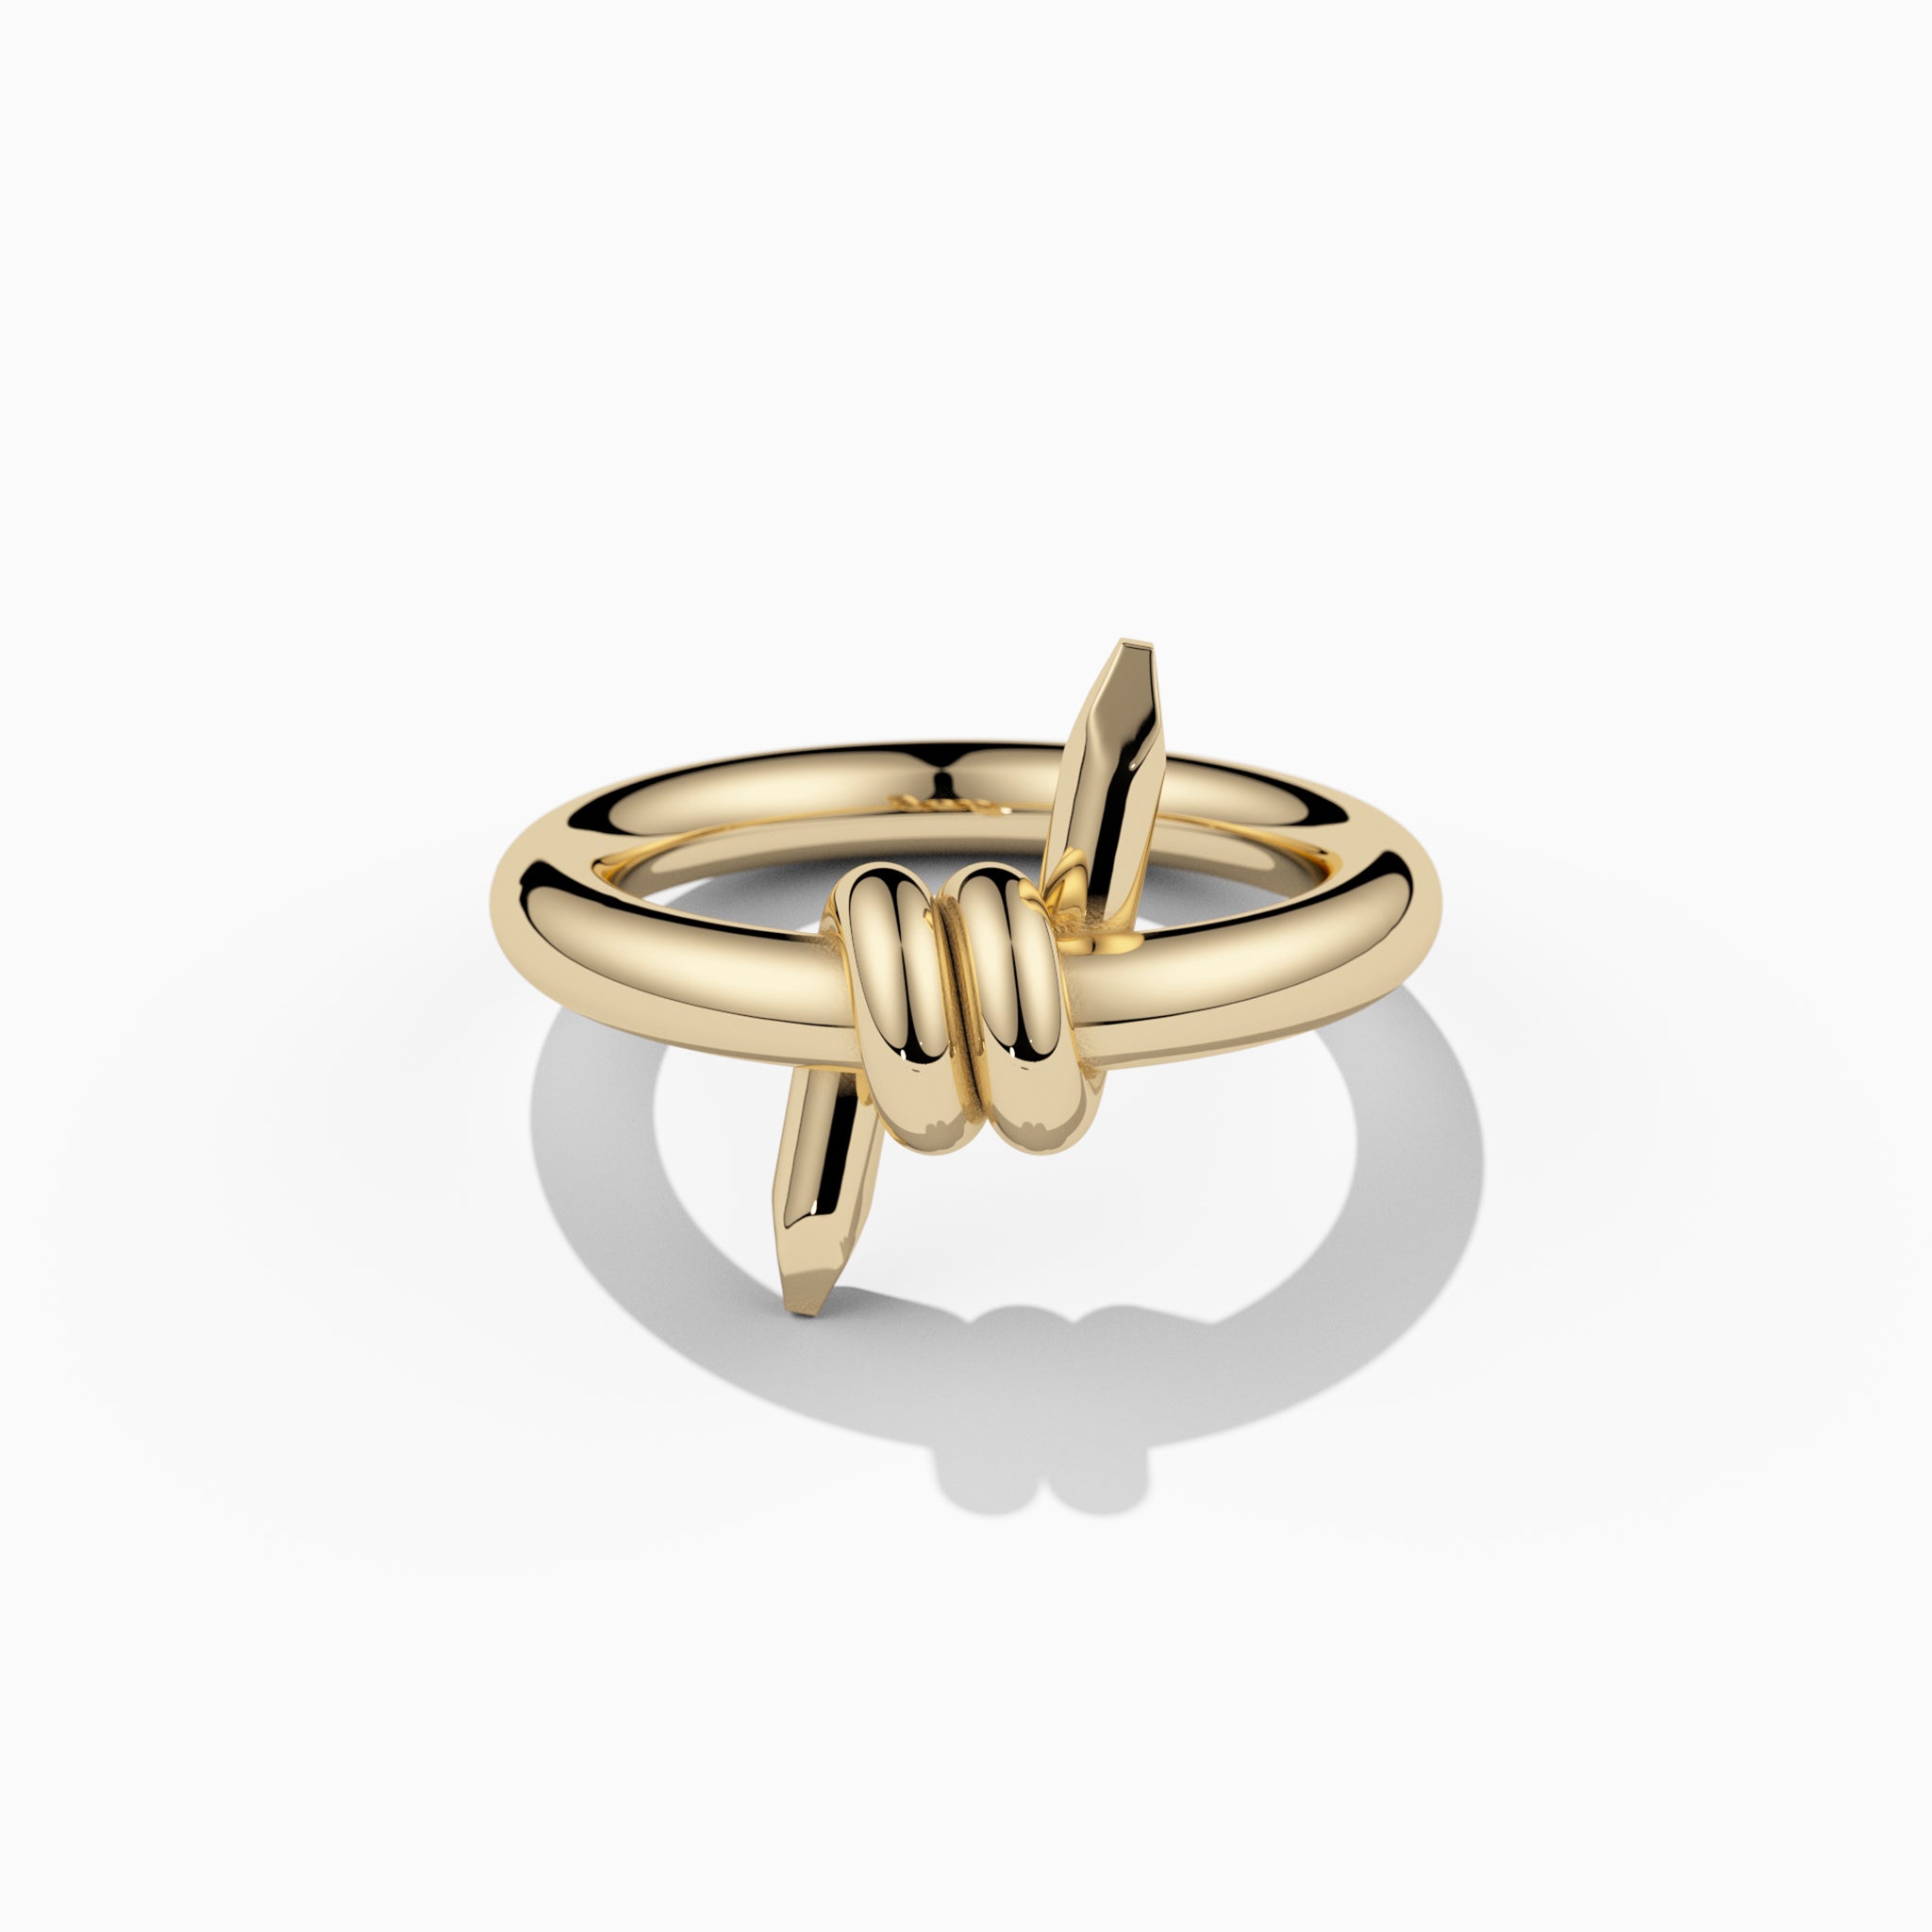 ordinarysterling 14k solid gold barbed wire ring 